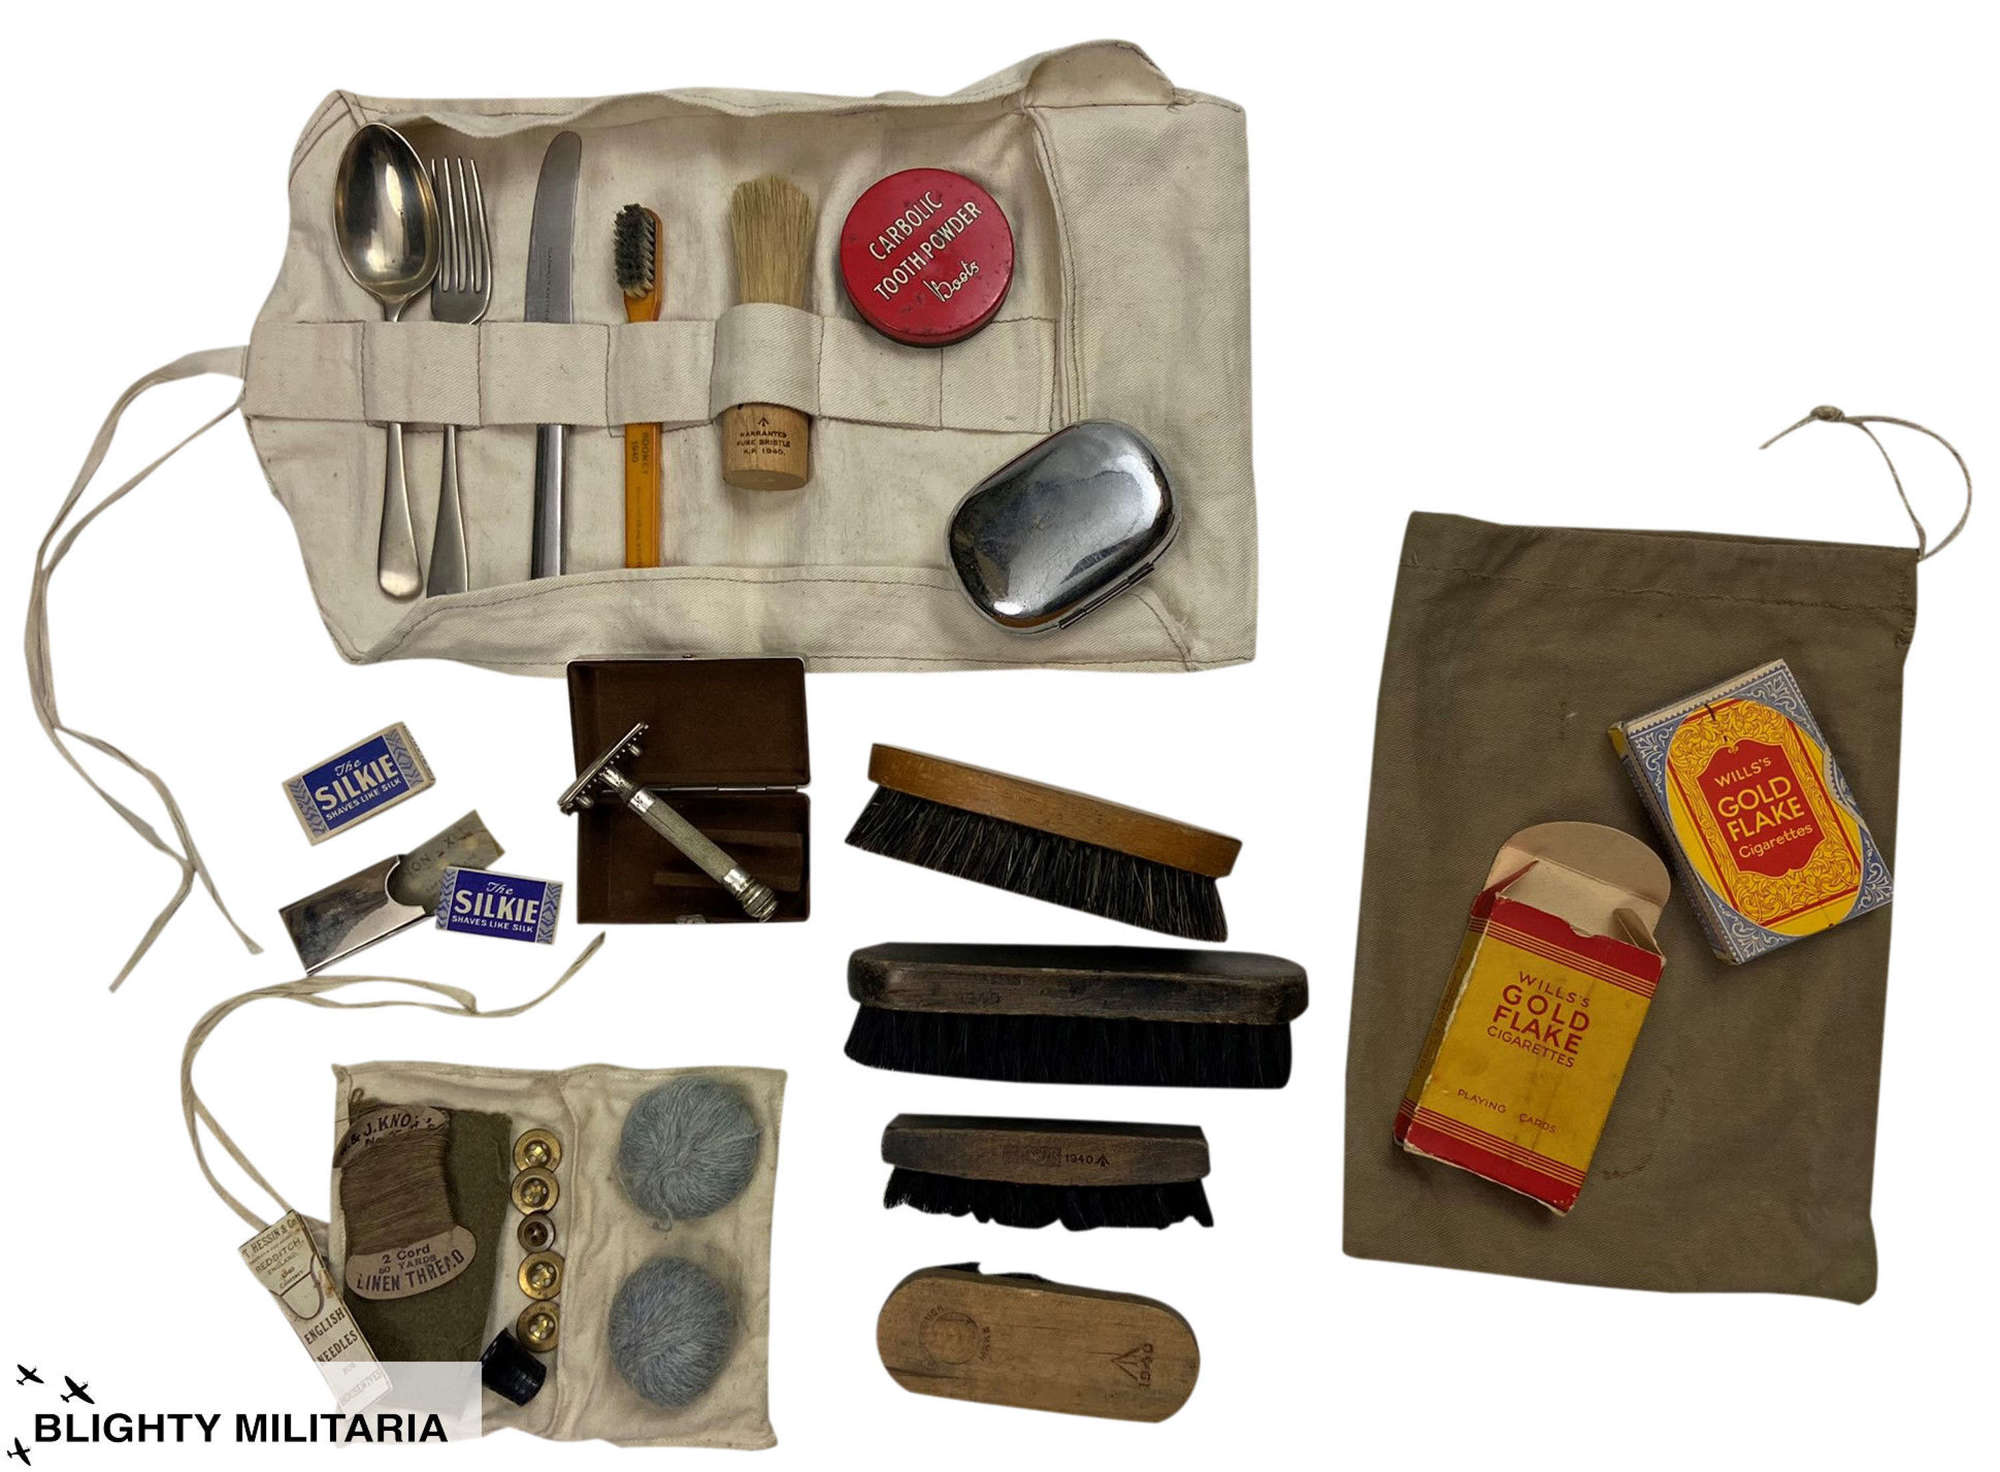 Complete Original BEF Soldier's Wash Roll and Accessories